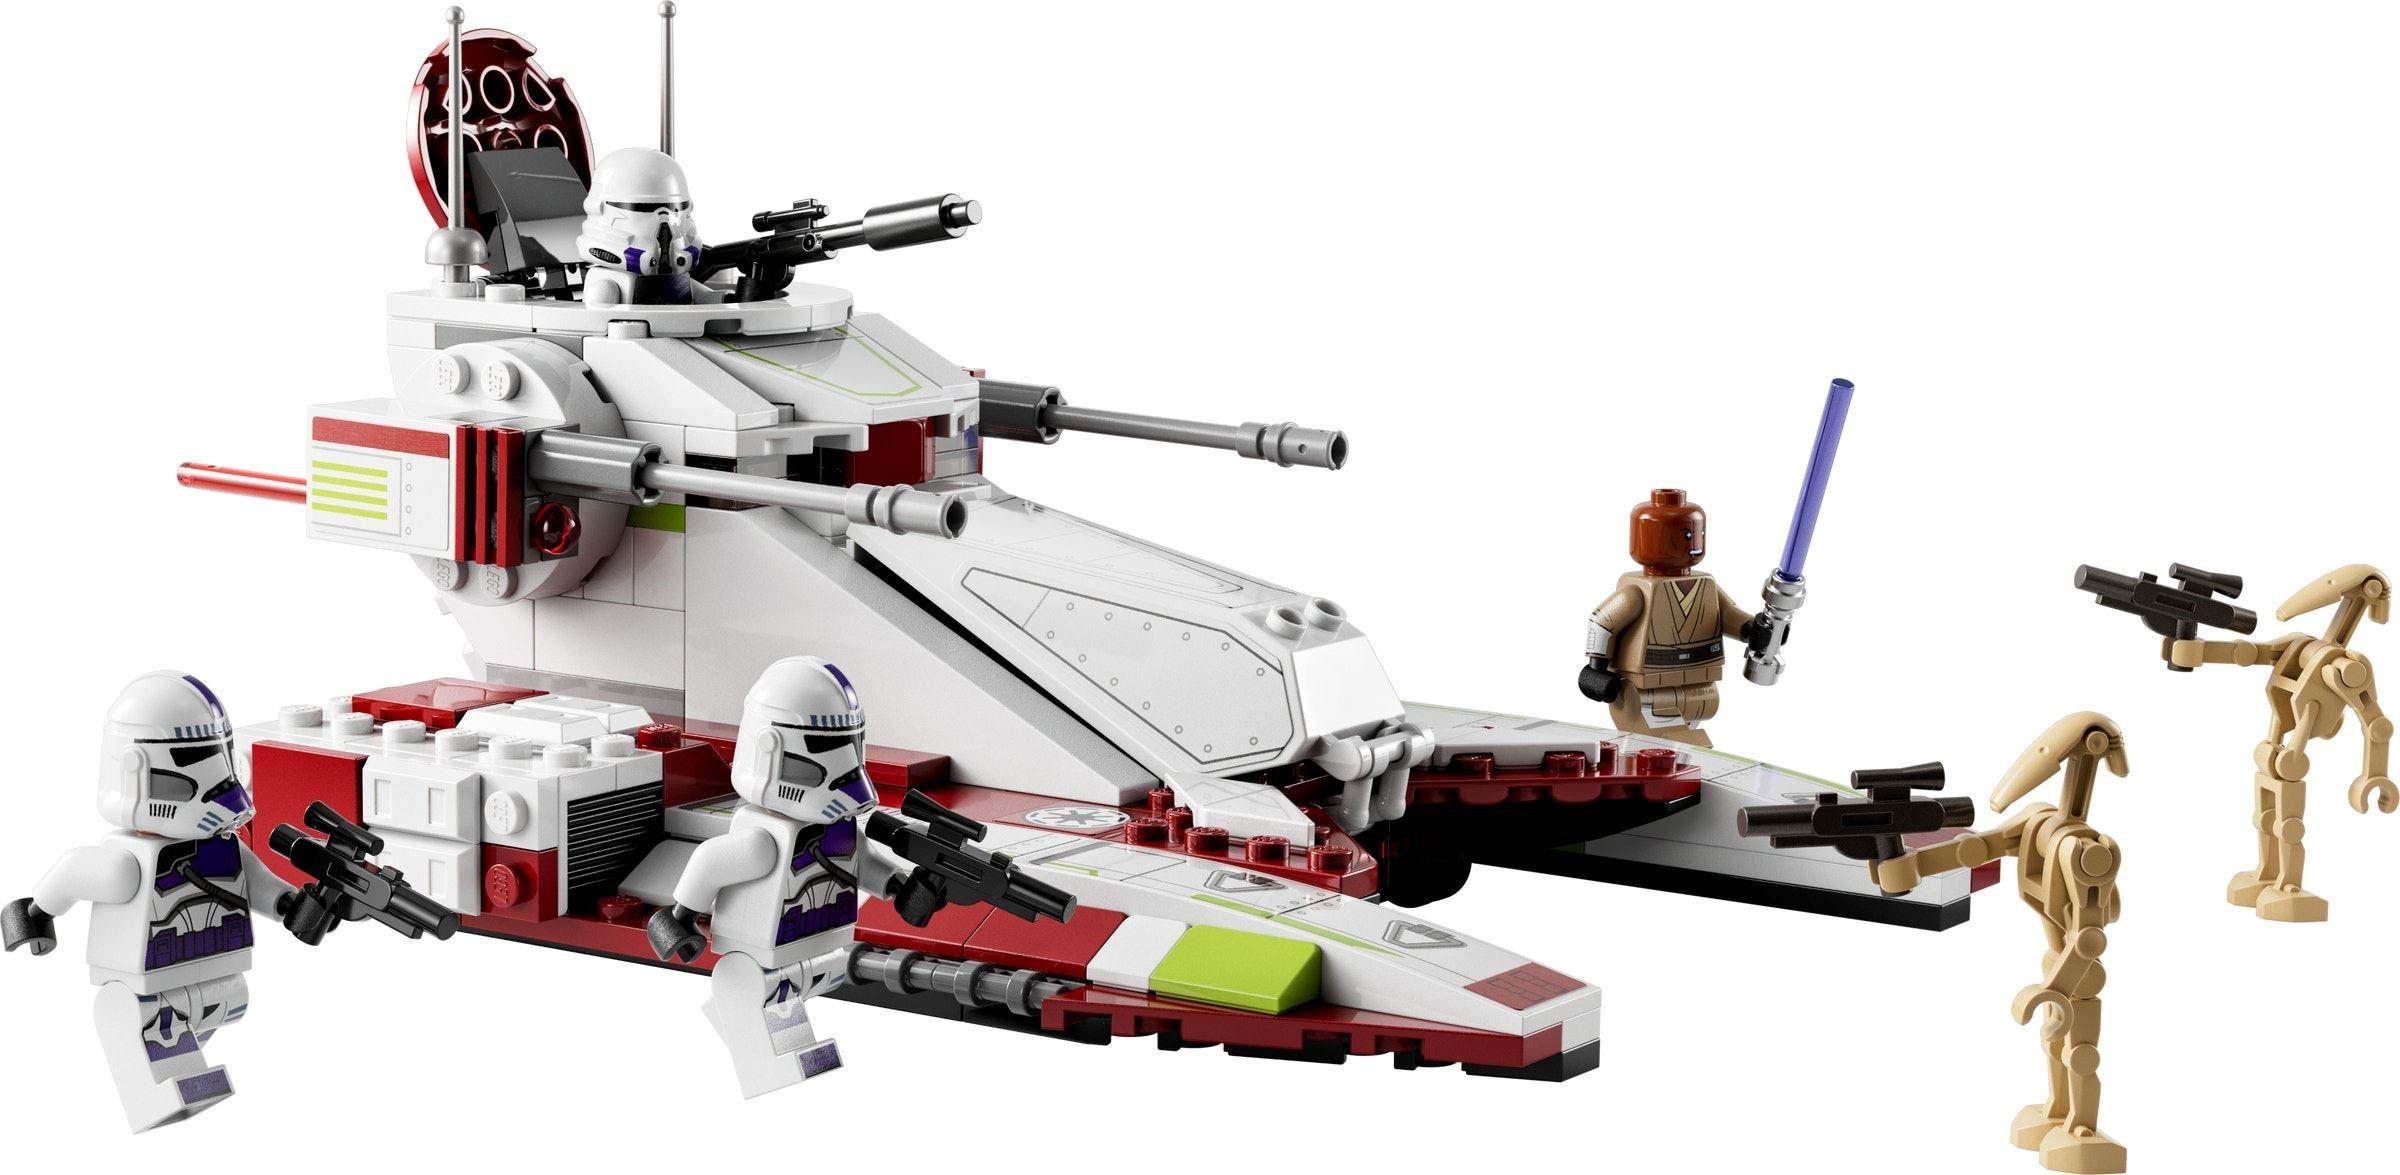 Review: 75342 Republic Fighter Tank - Jay's Brick Blog